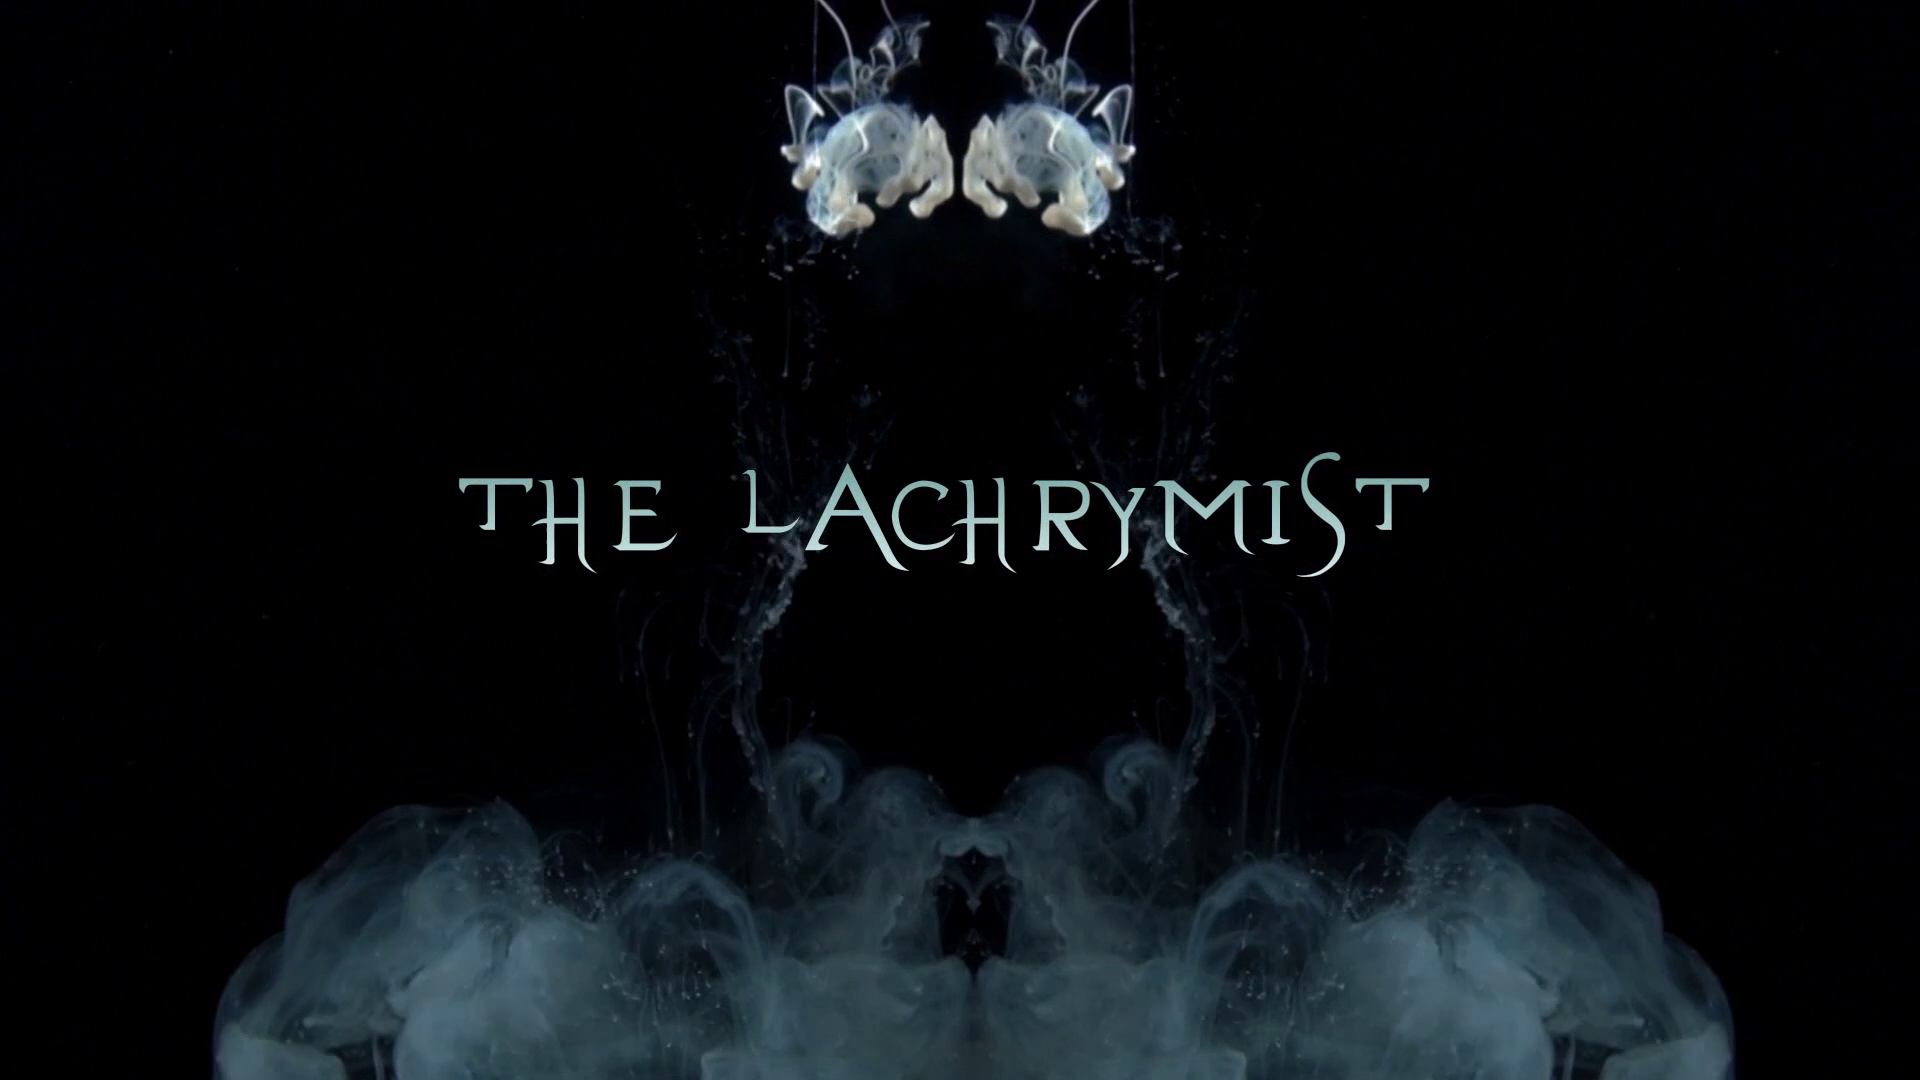 The Lachrymist Film Titles